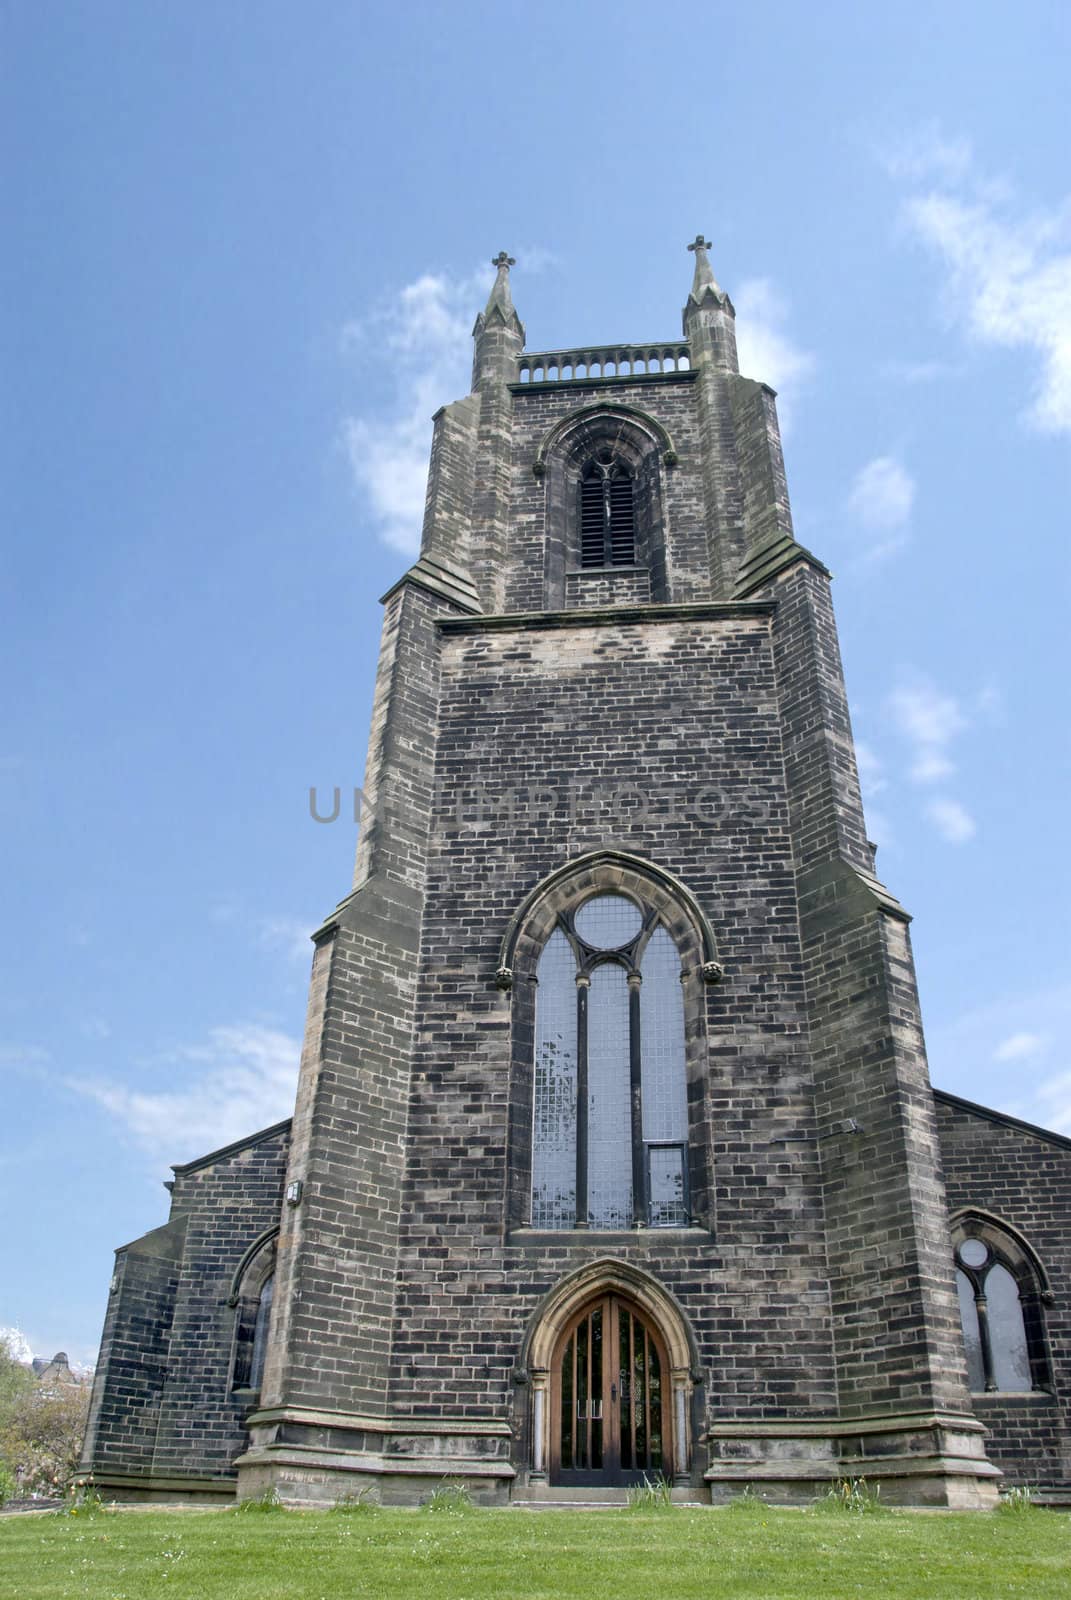 A Church Tower in Skipton Yorkshire against a blue spring sky